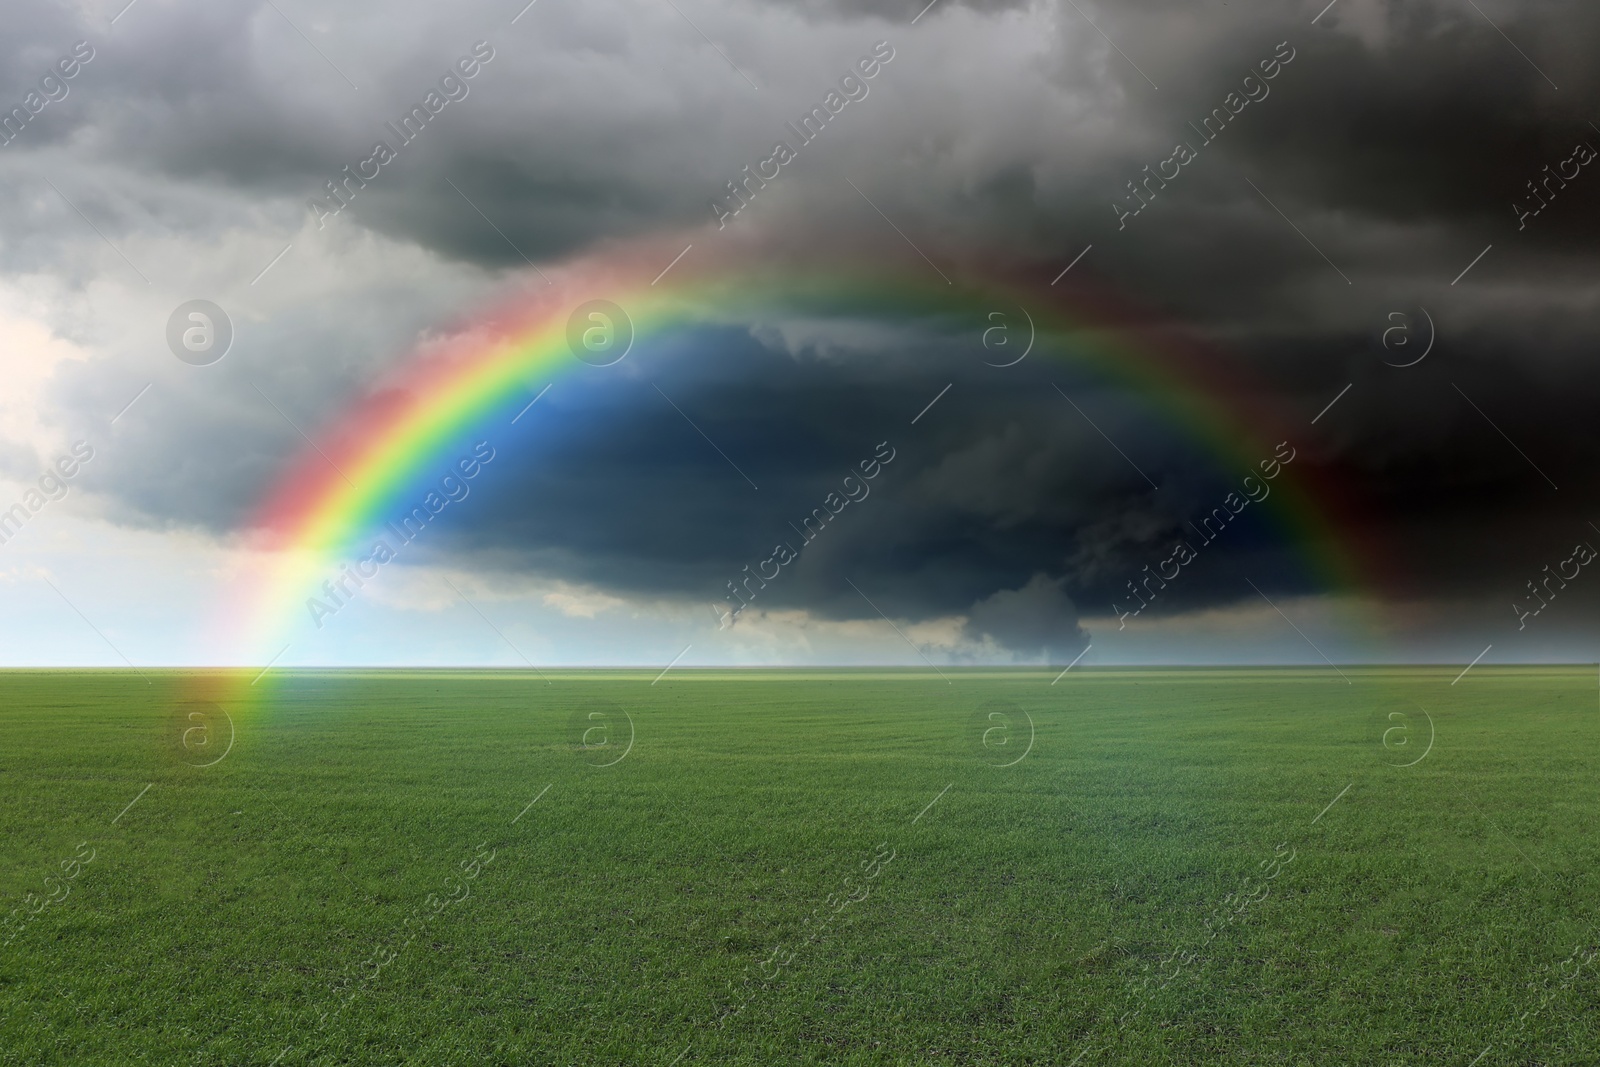 Image of Amazing rainbow over green field under stormy sky